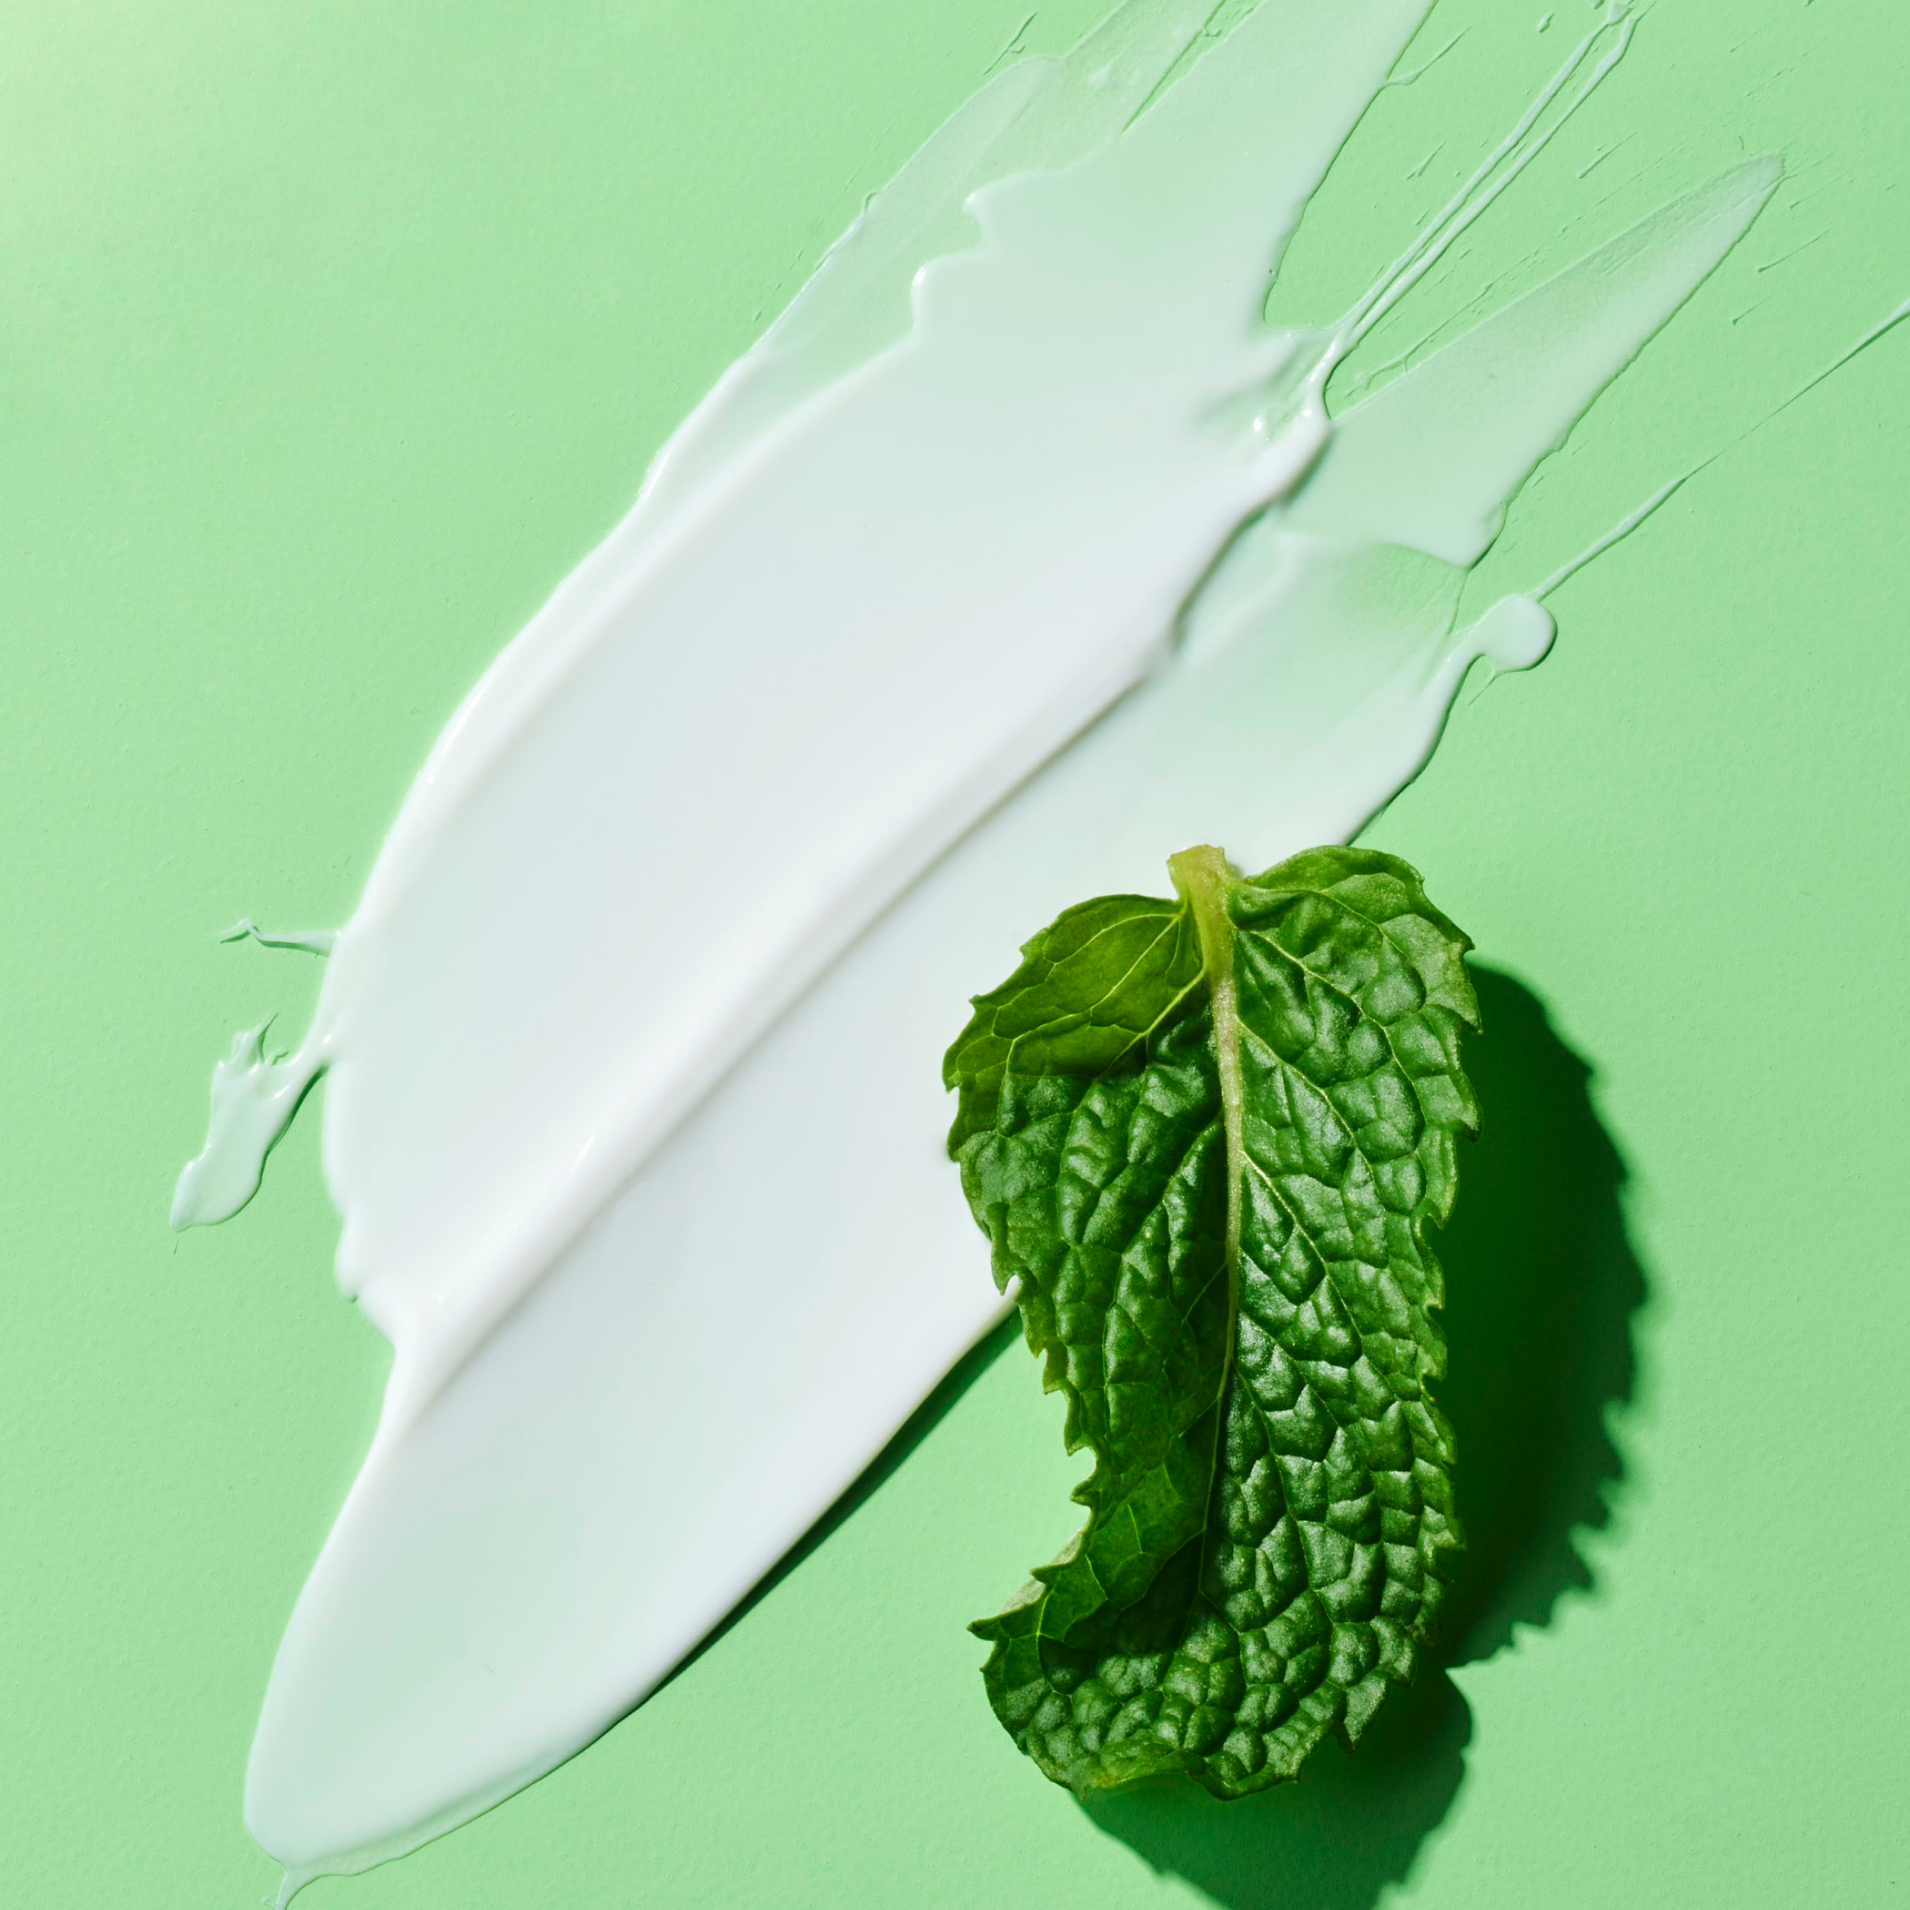 A white spread of POP Mint Toothpaste on a green surface with a mint leaf on it.